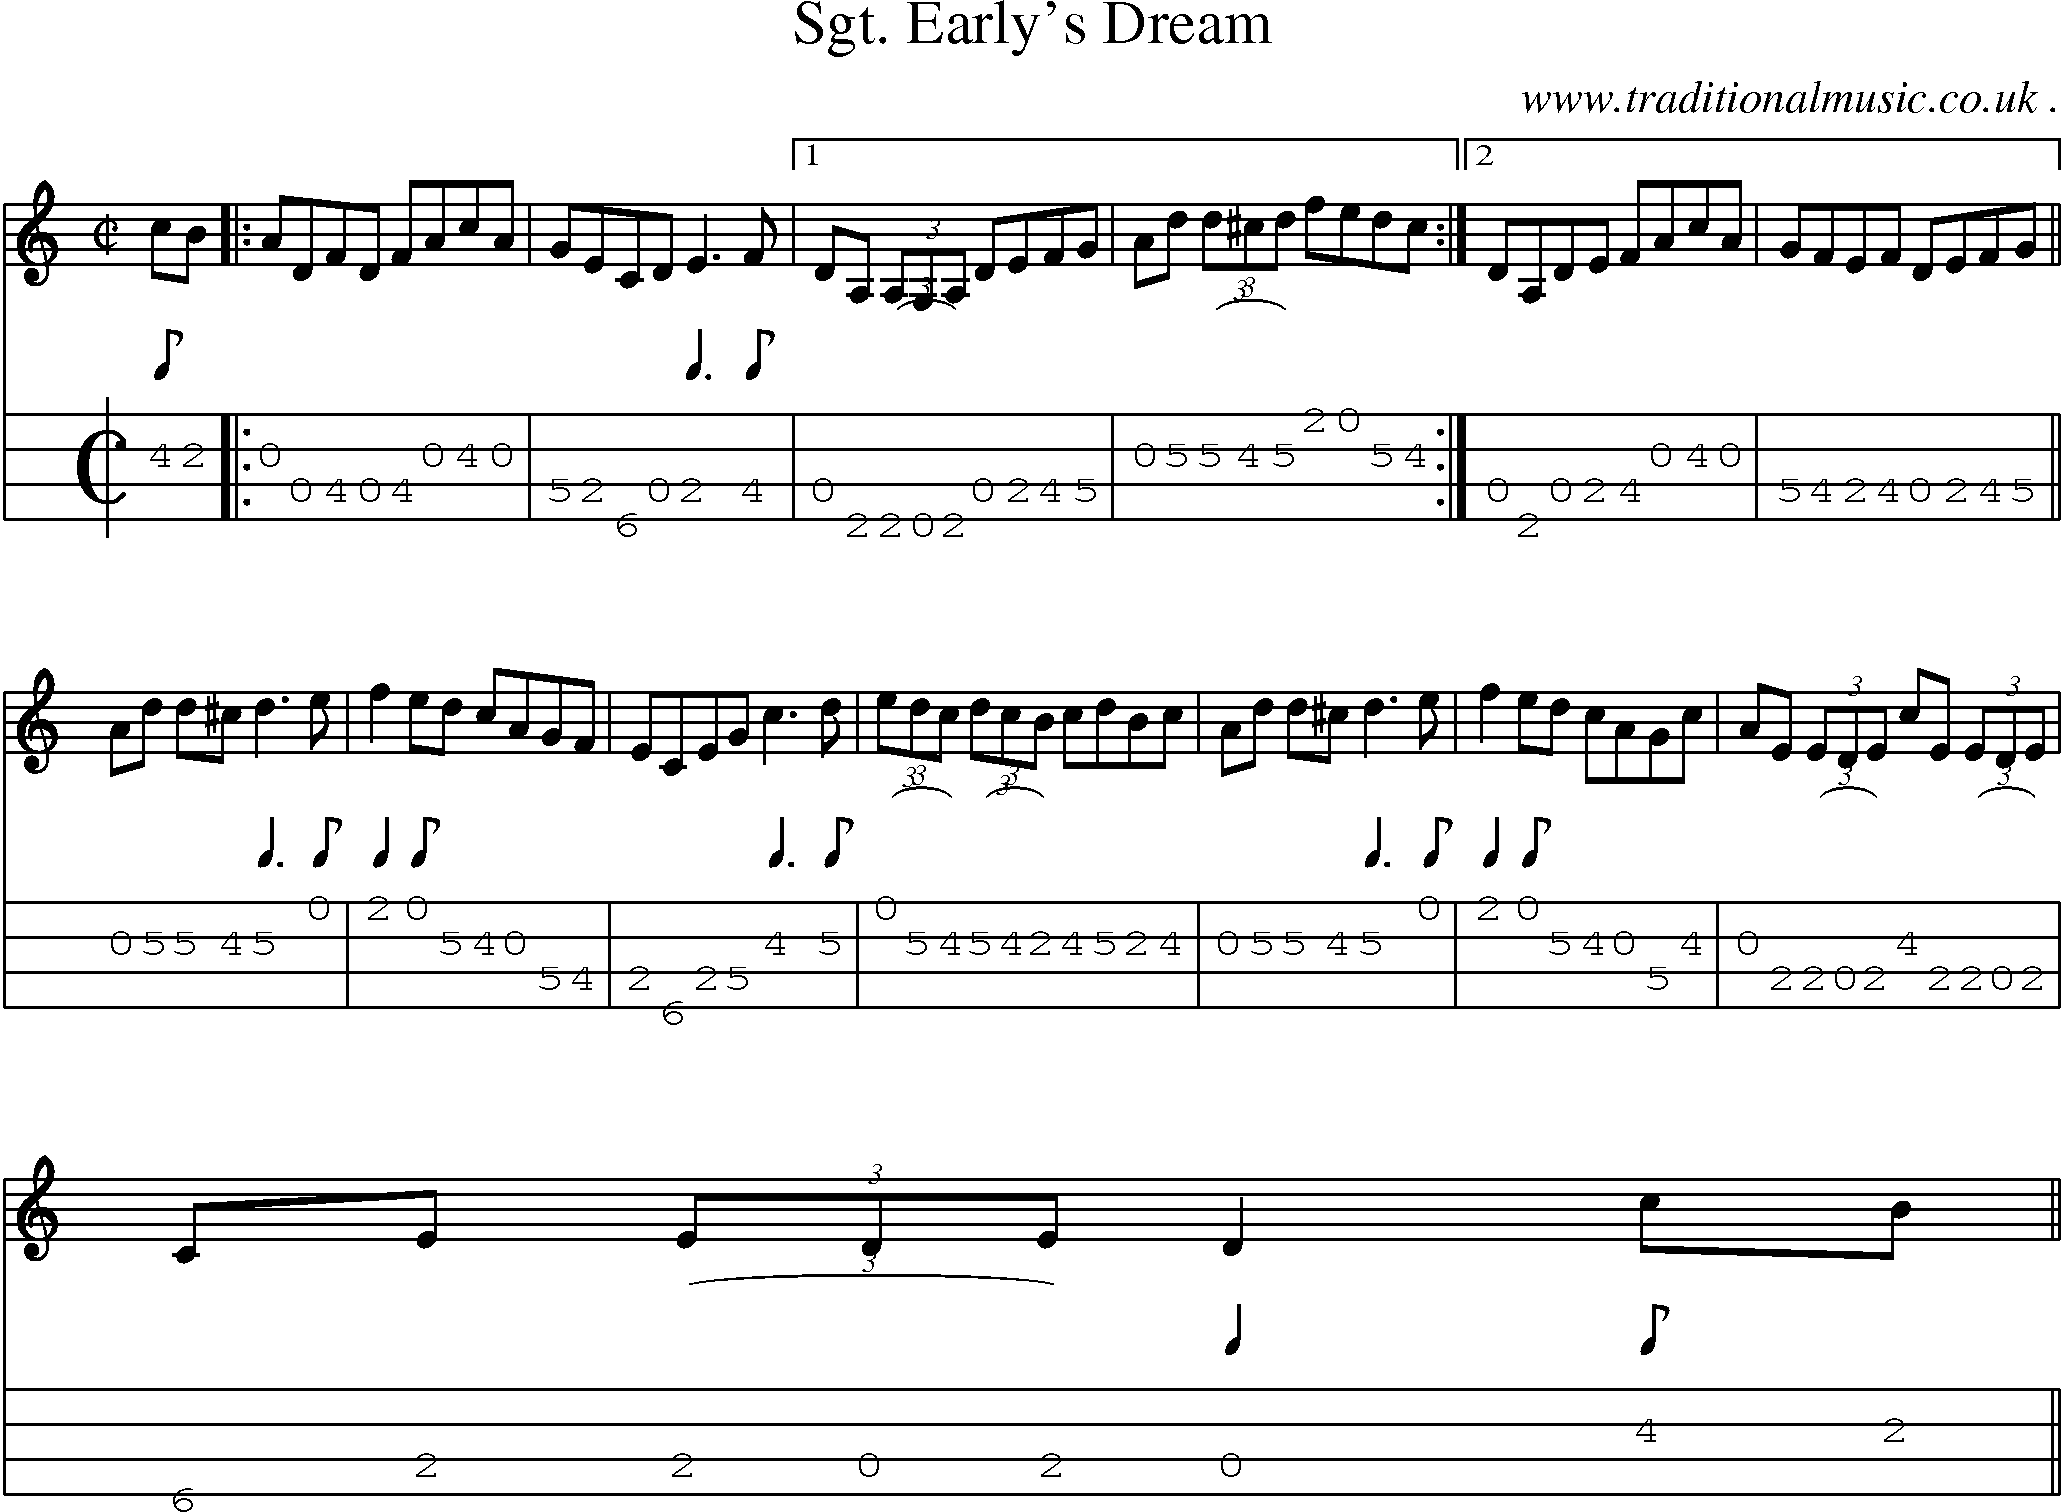 Sheet-Music and Mandolin Tabs for Sgt Earlys Dream